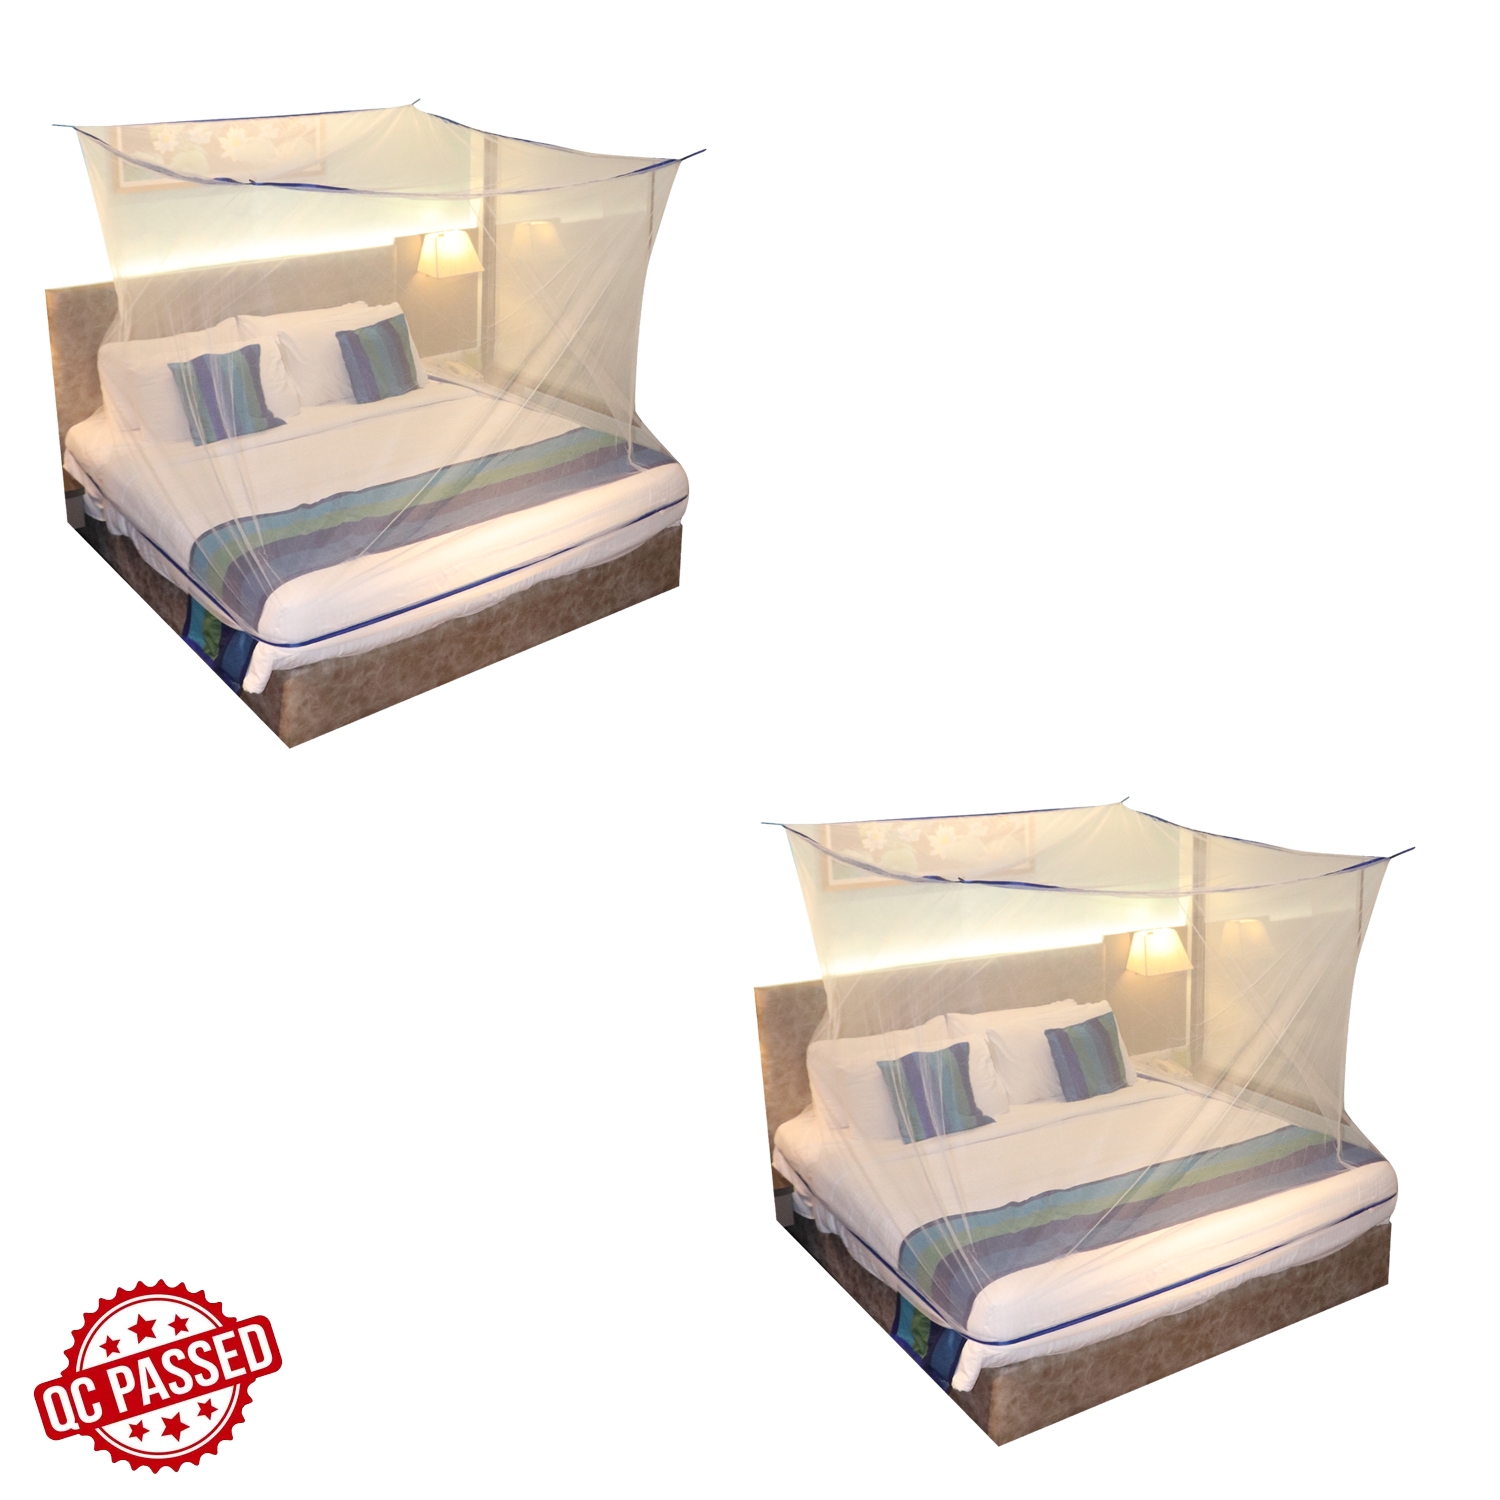 SILVER SHINE | Mosquito Net for Double Bed, King-Size, Square Hanging Foldable Polyester Net White And BluePack of 2 1